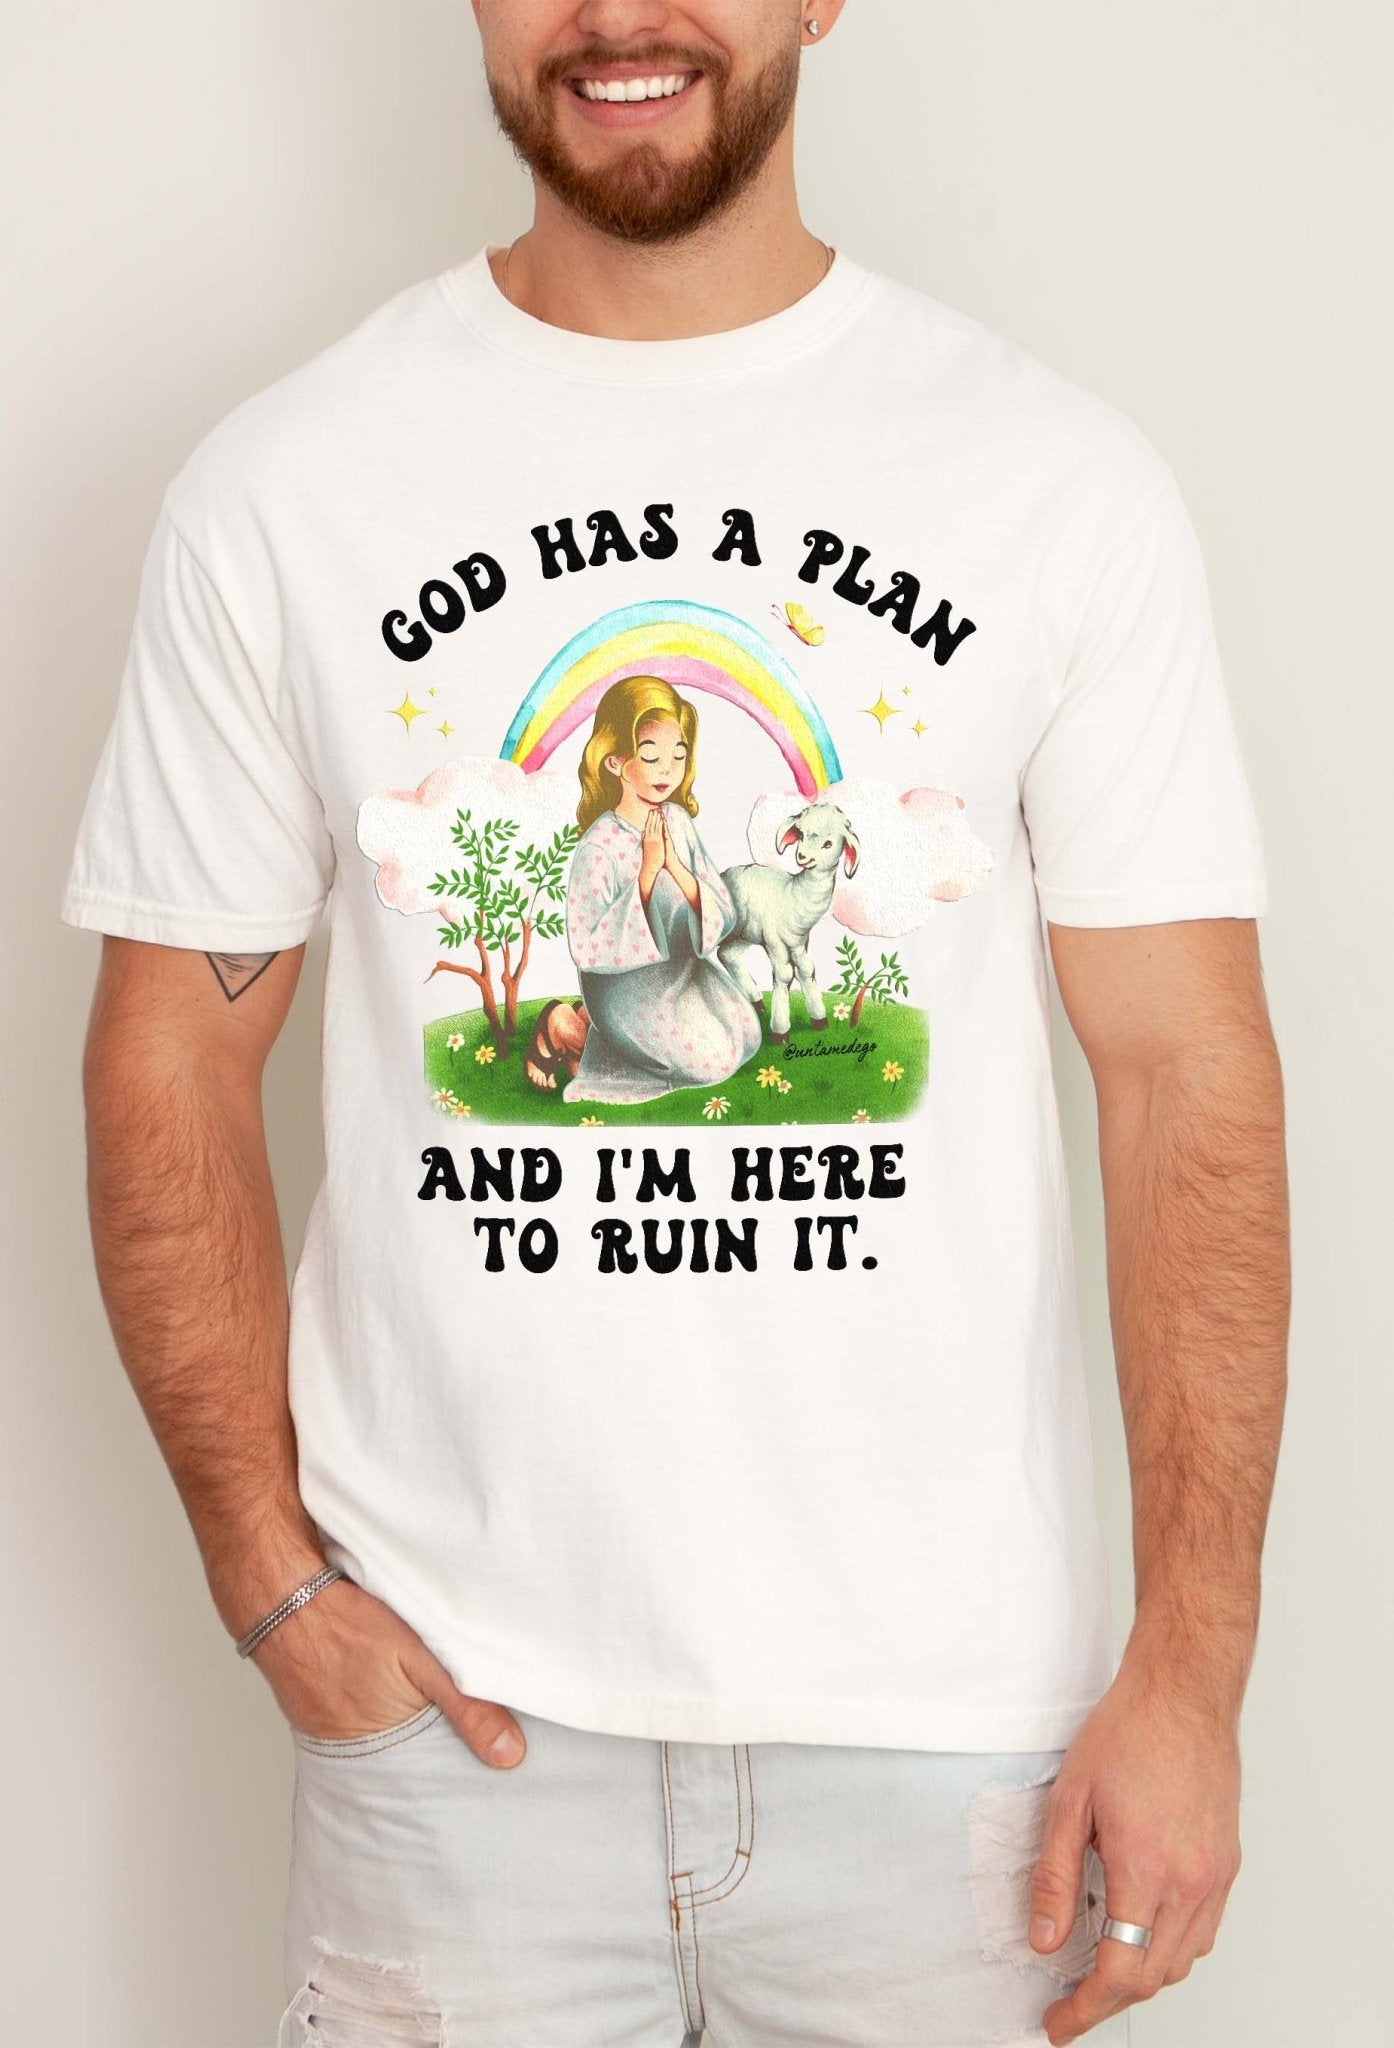 God Has A Plan And I'm Here To Ruin It Mens Tee - UntamedEgo LLC.